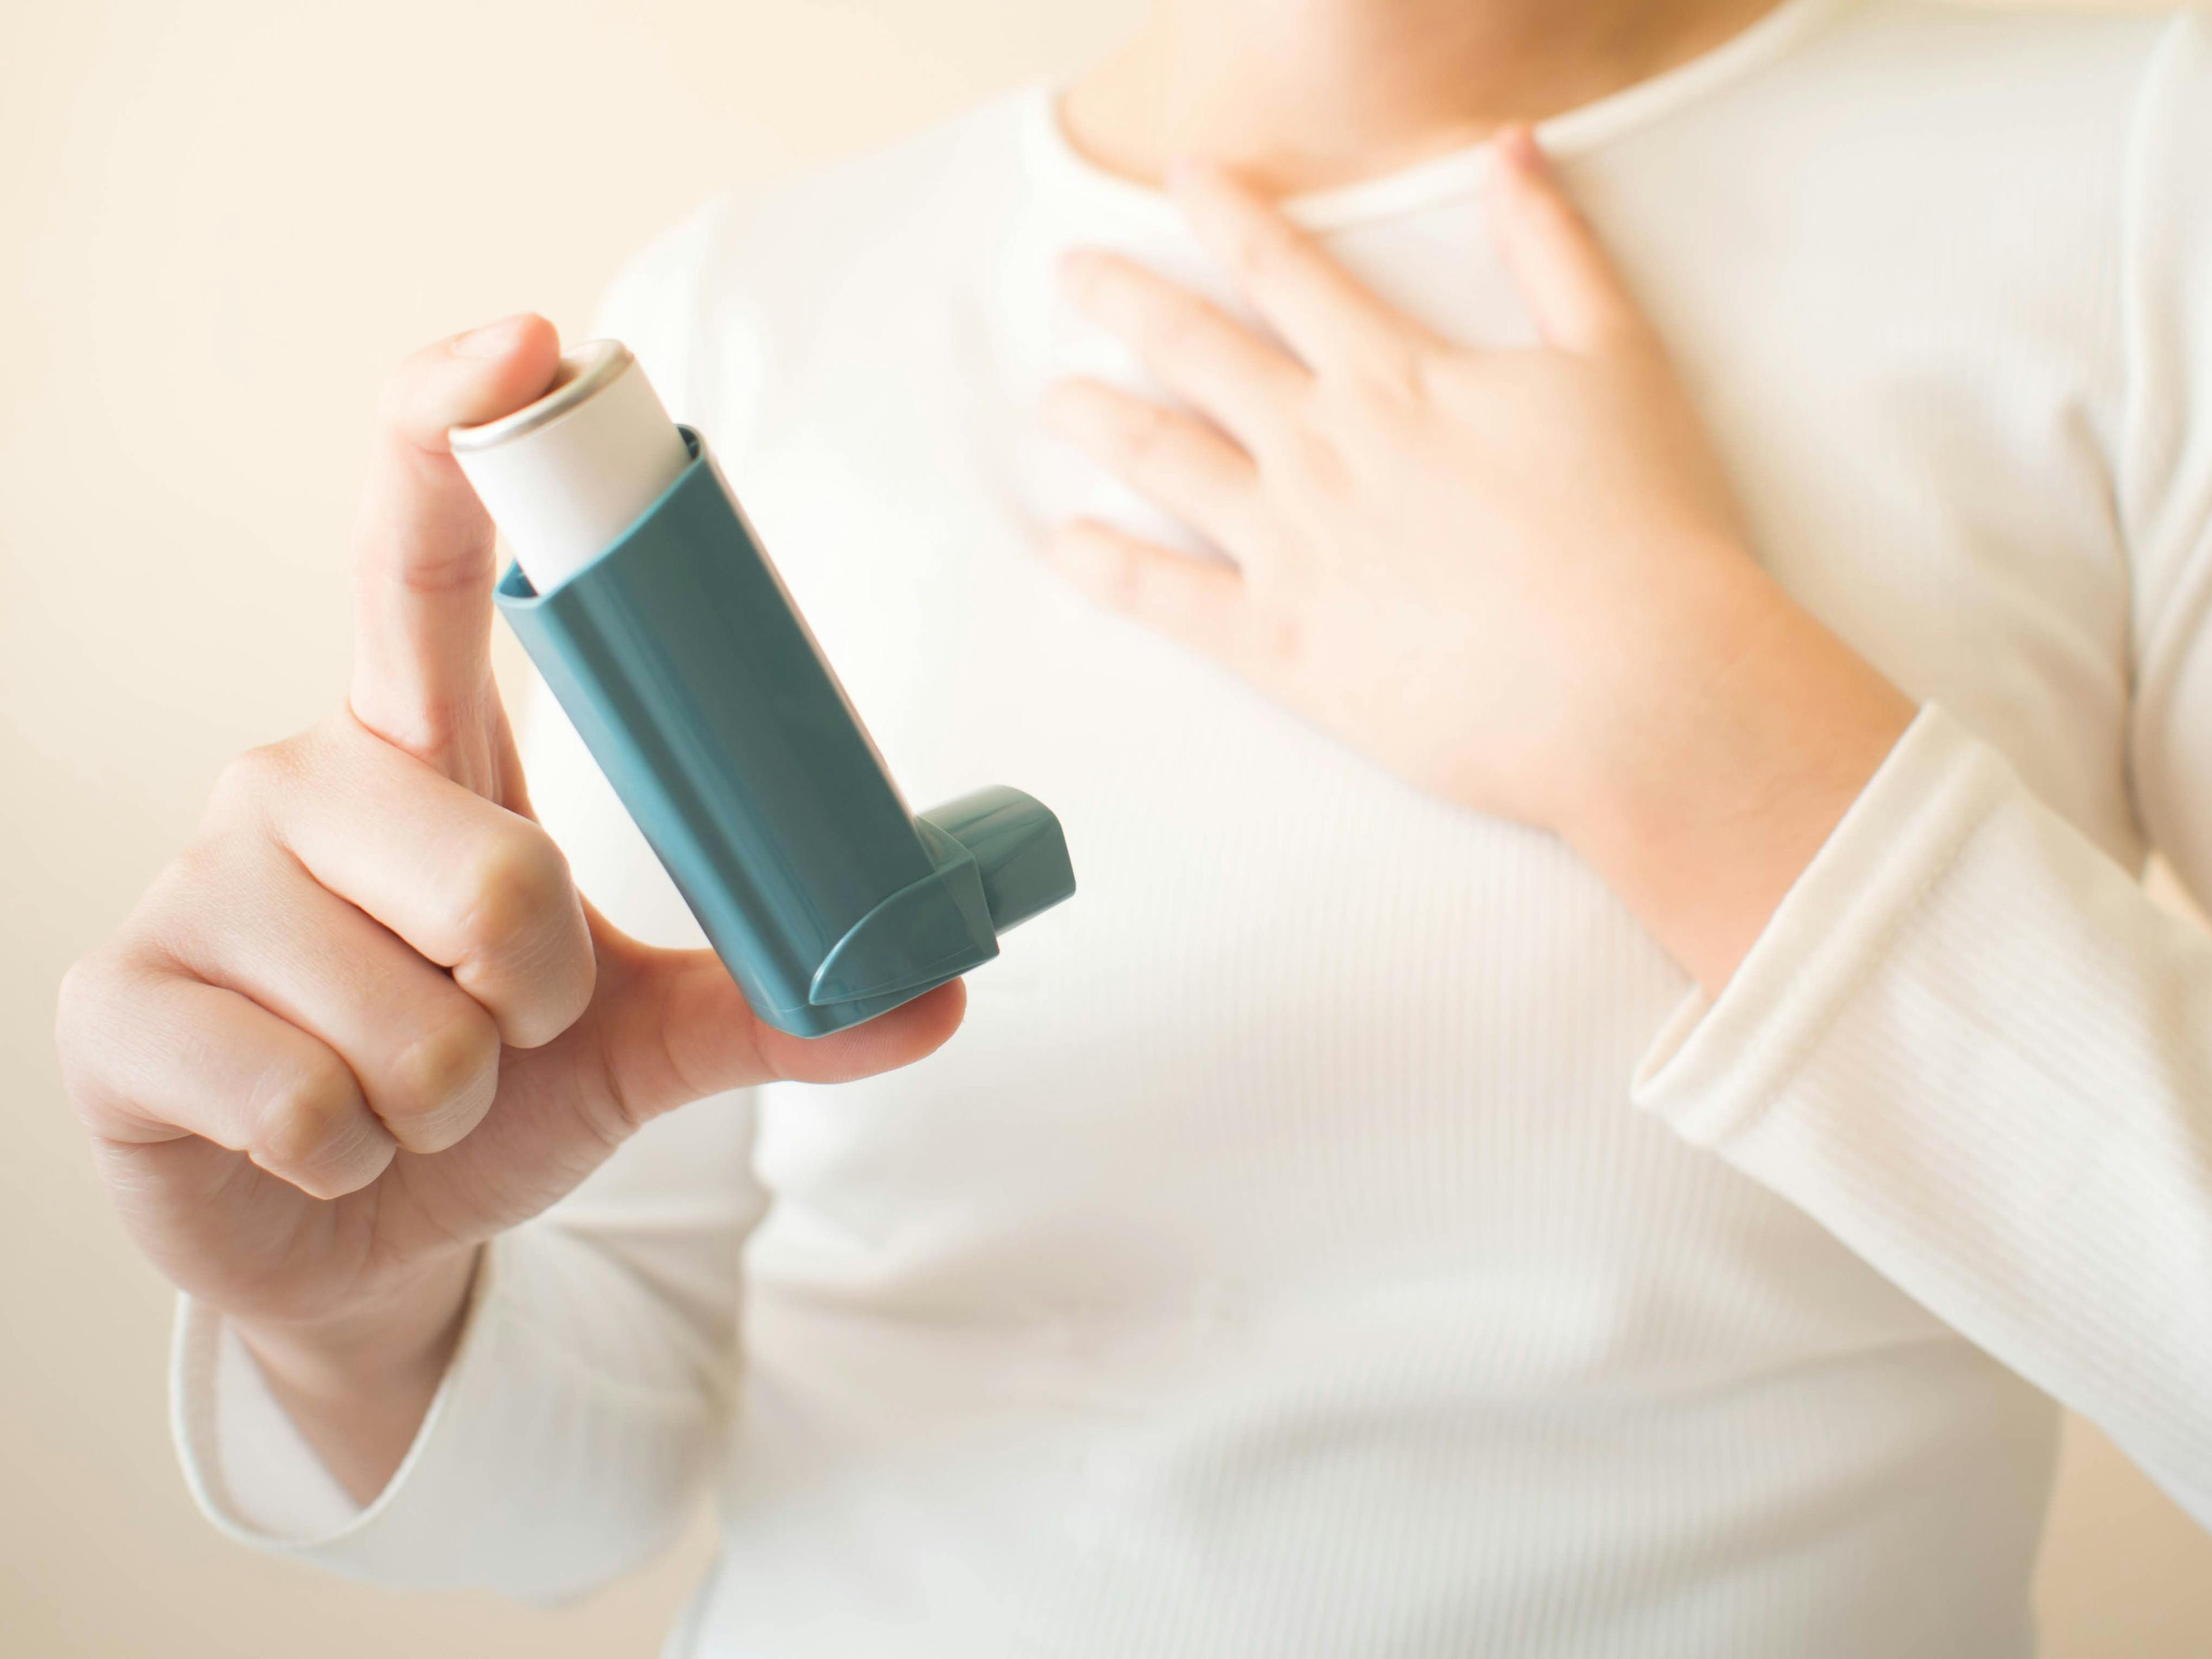 Young female in white t-shirt using blue asthma inhaler for relief asthma attack. Pharmaceutical products is used to prevent and treat wheezing and shortness of breath caused asthma or COPD. Close up | Orawan - stock.adobe.com